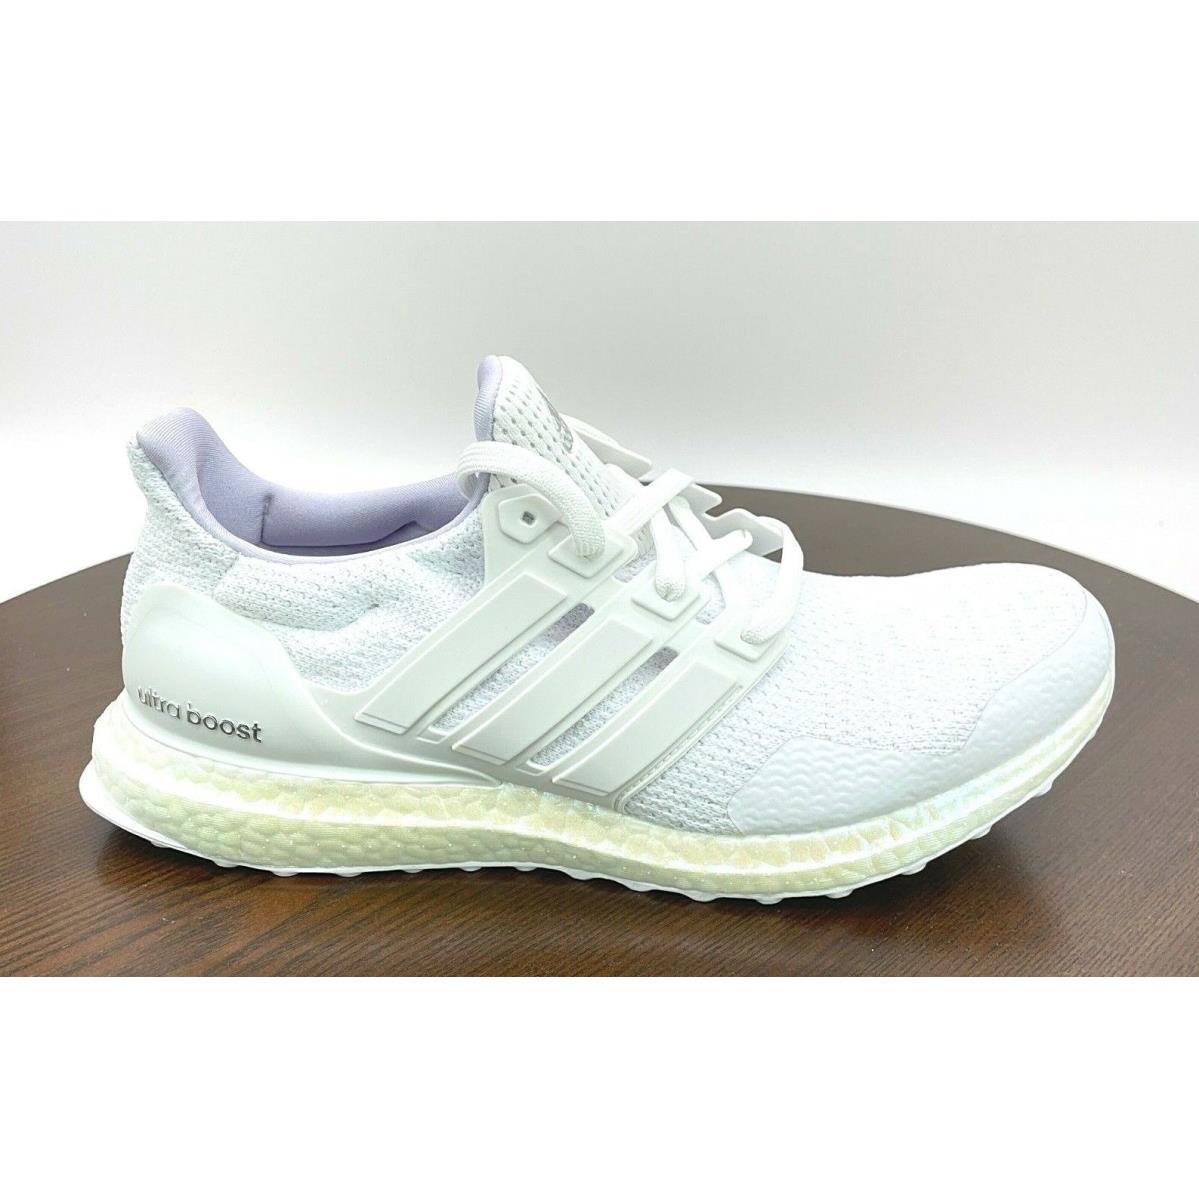 Adidas shoes Ultraboost - White/White/White , Cloud White/Crystal White/Supplier Colour Manufacturer 3